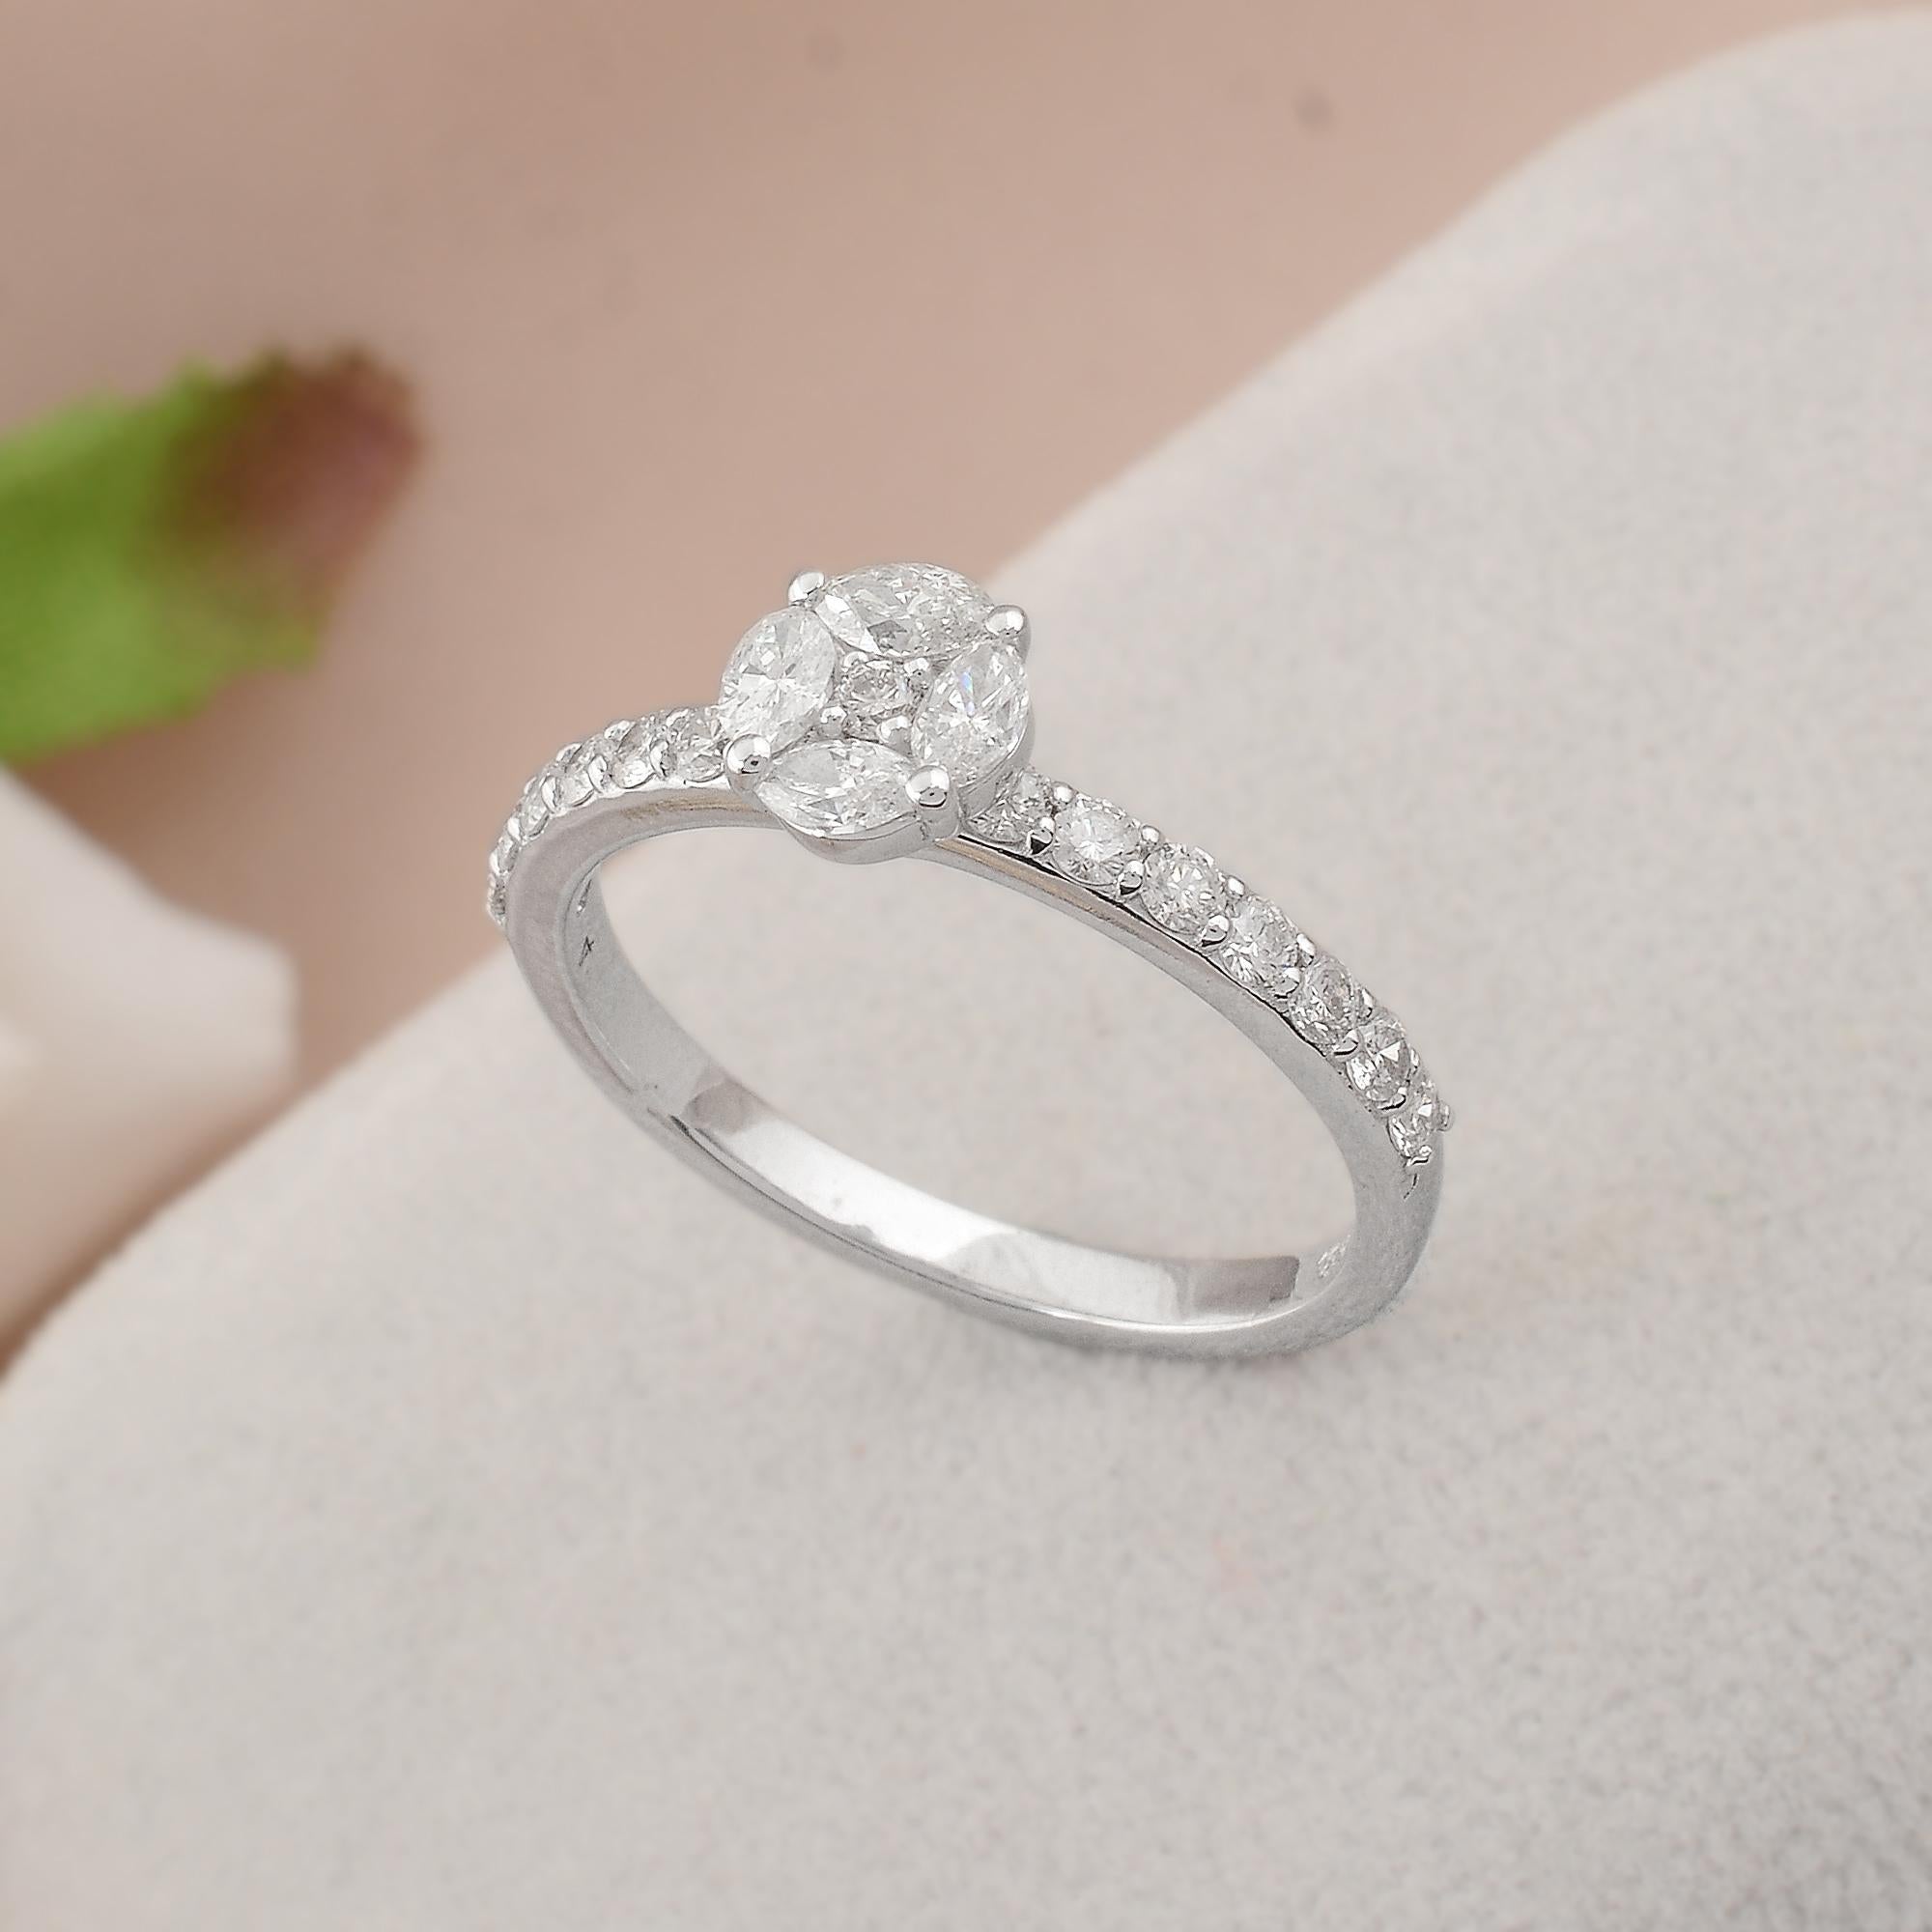 For Sale:  0.79 Carat SI Clarity HI Color Marquise & Round Diamond Fine Ring 18k White Gold 4